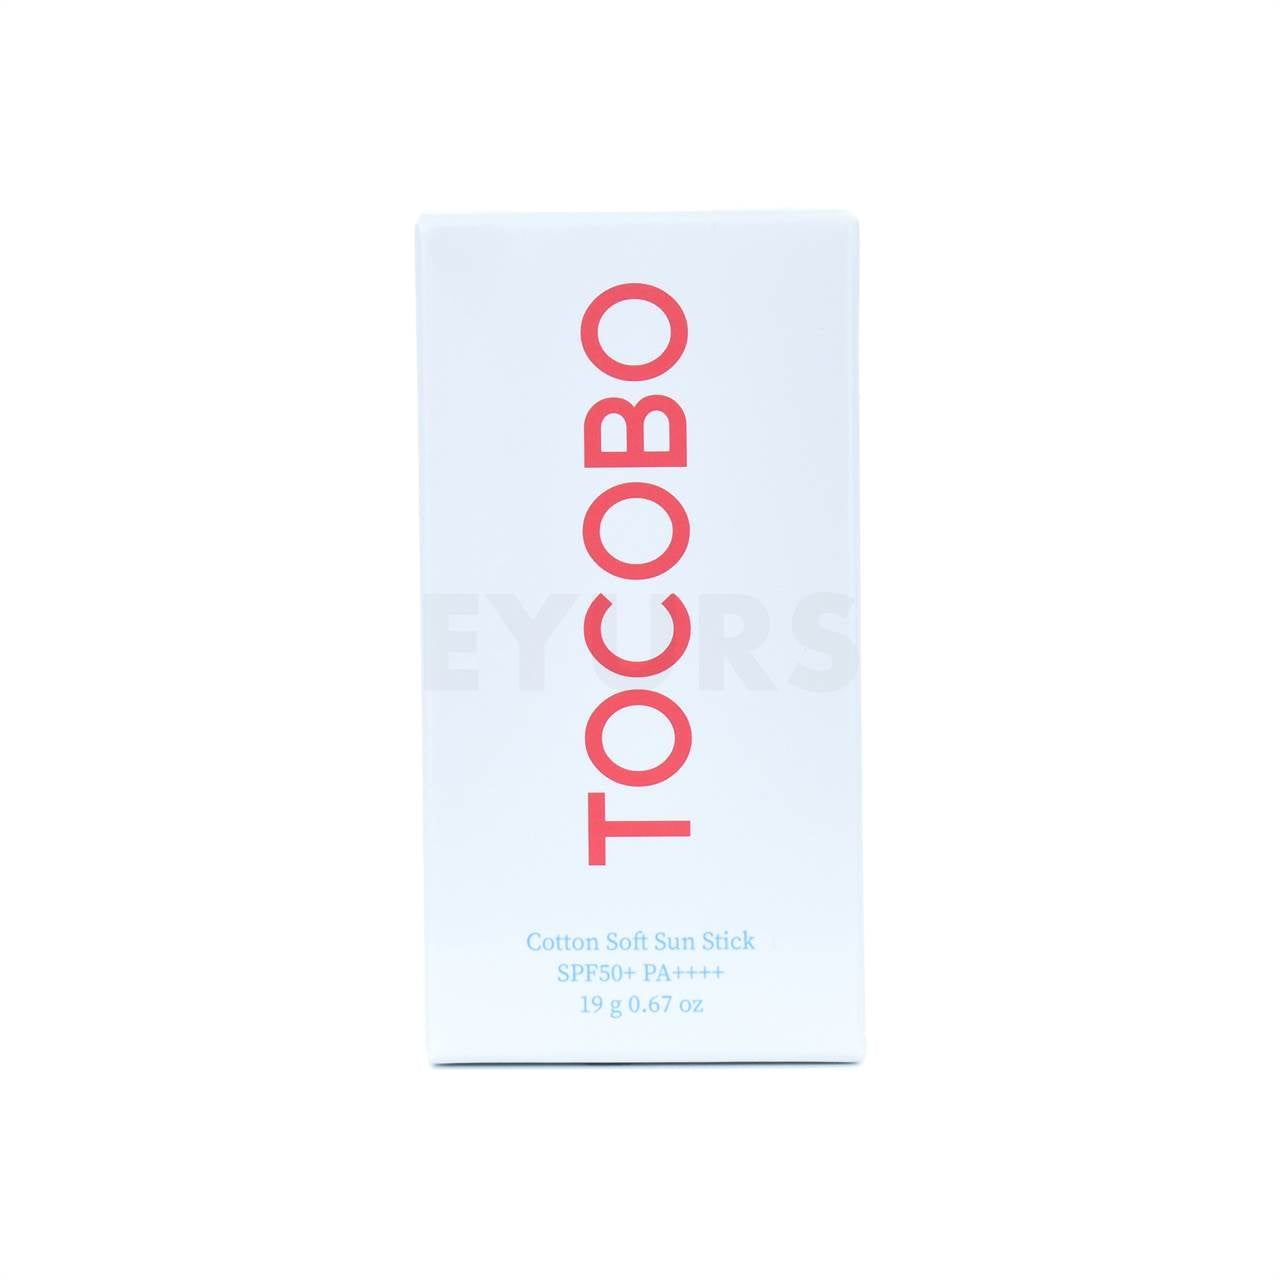 tocobo cotton soft sun stick front packaging